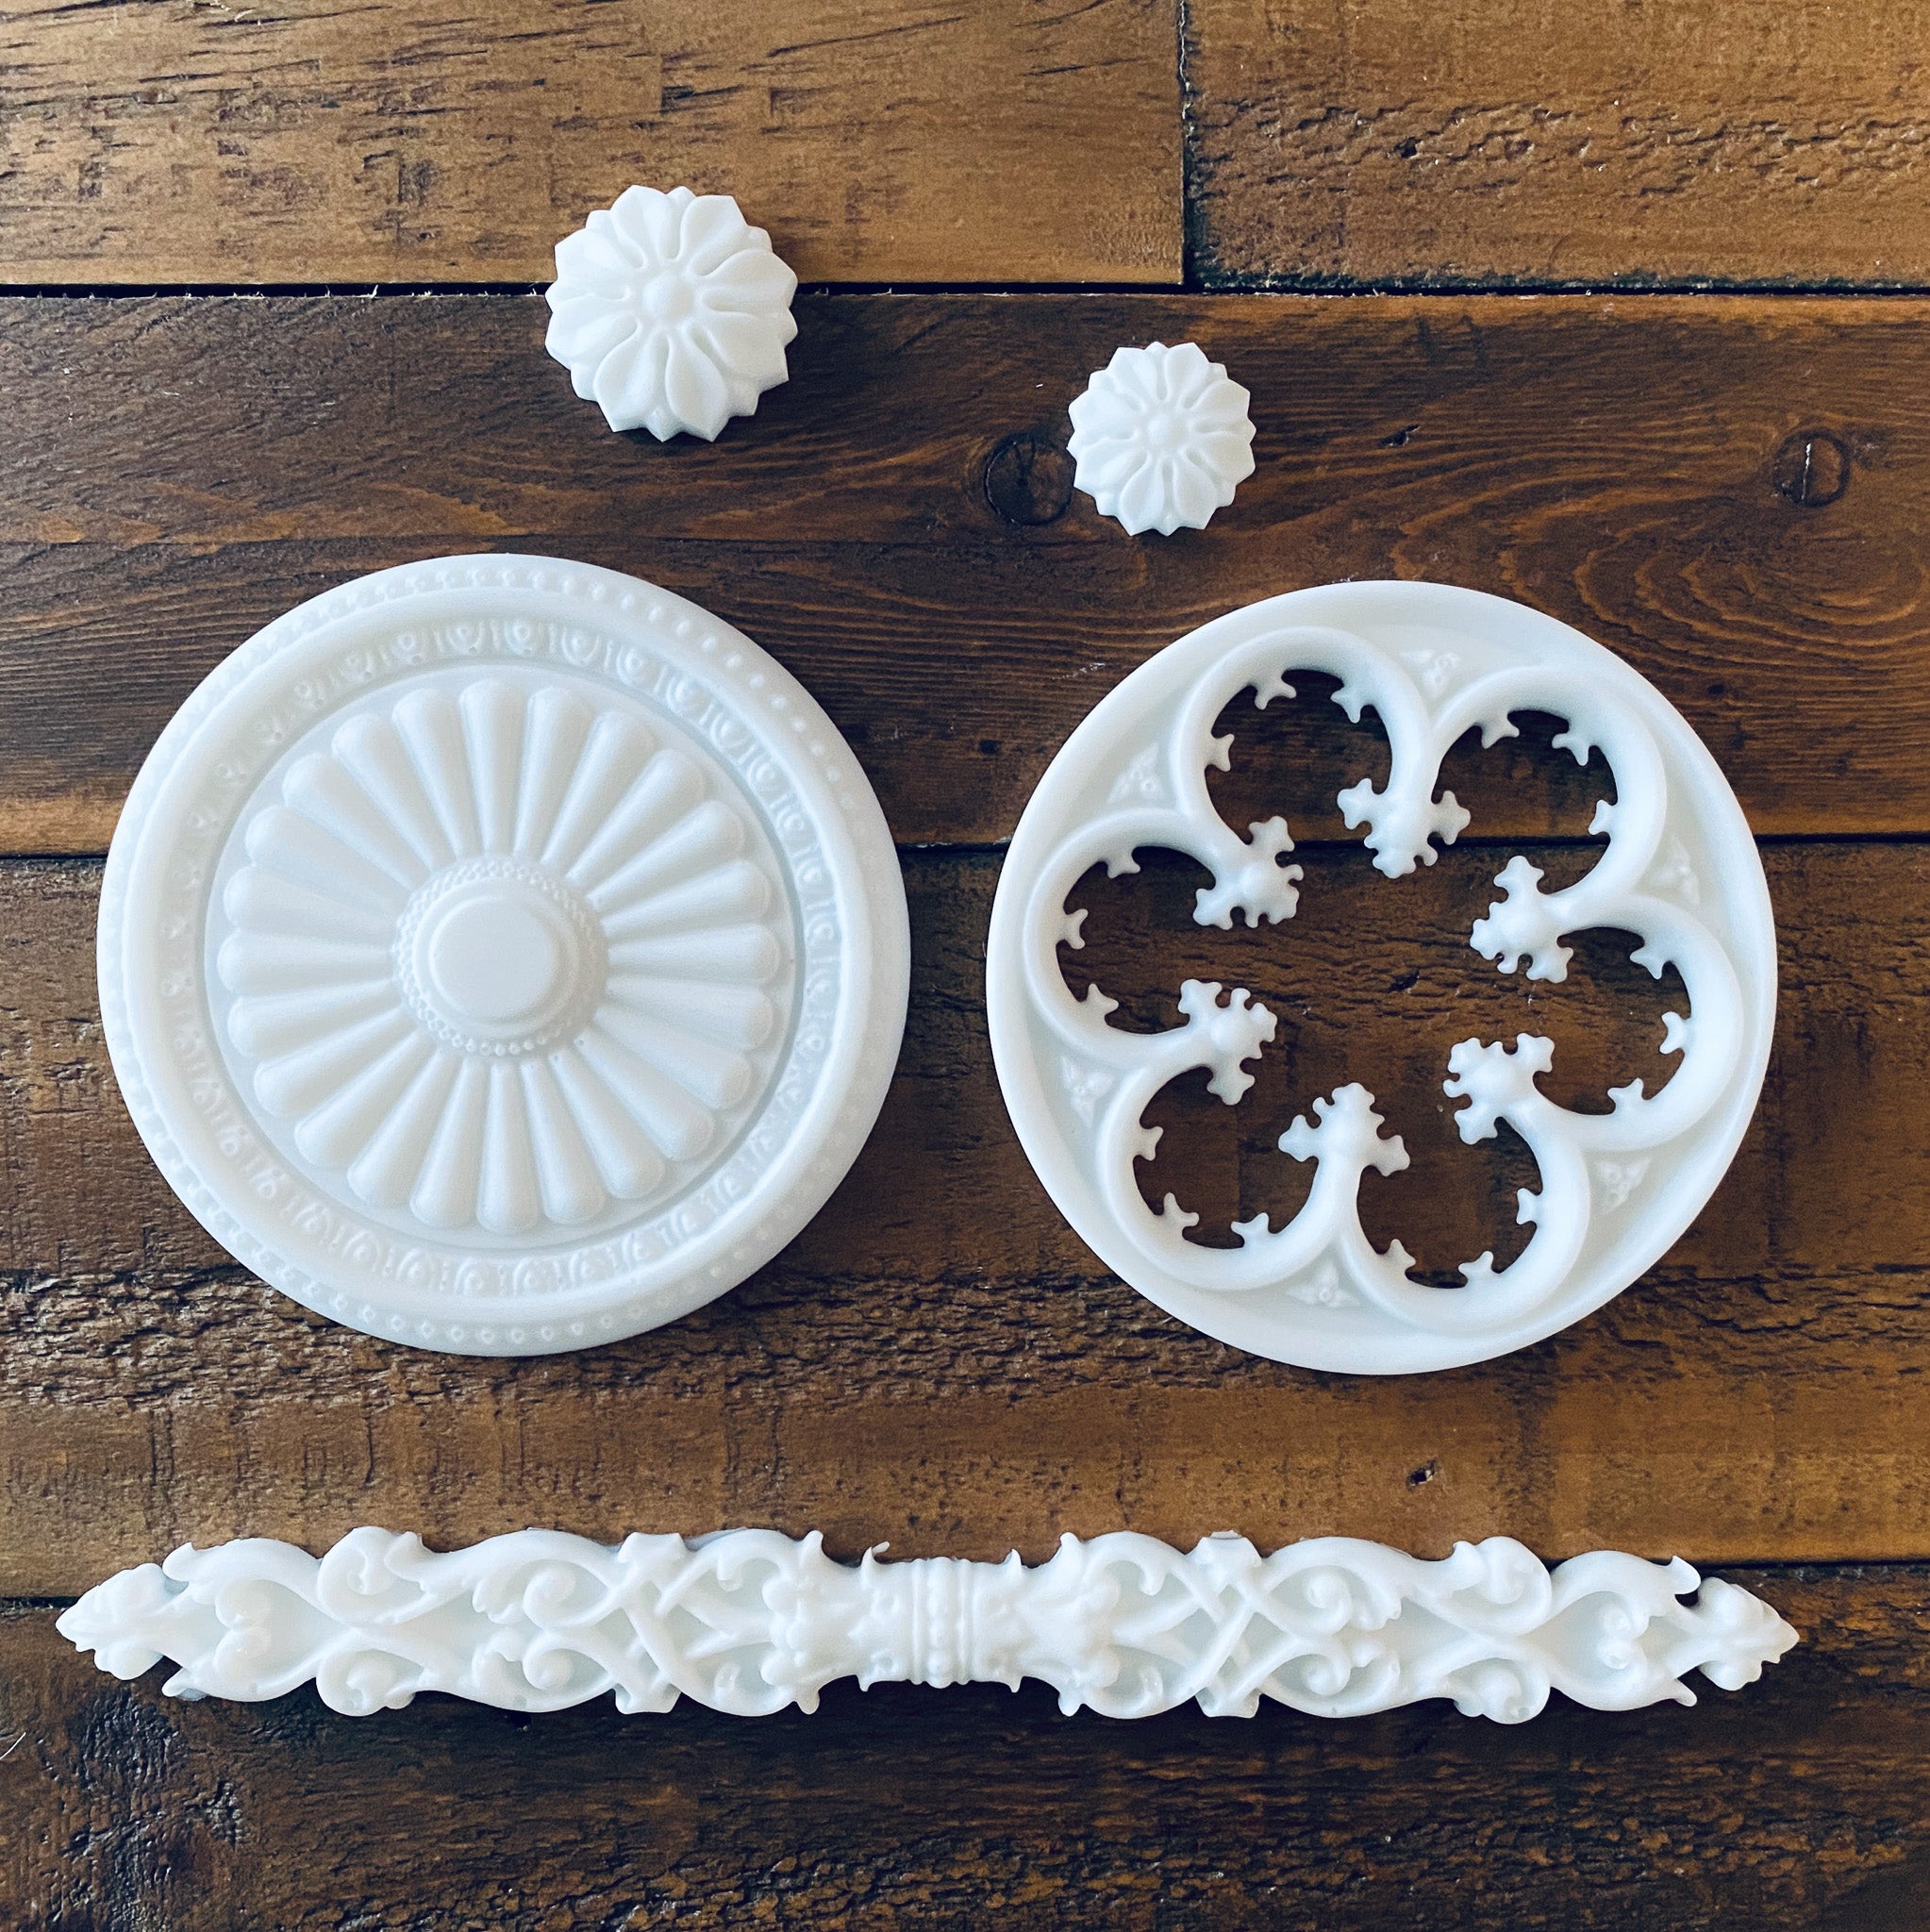 White resin castings of 2 round ornate accent pieces, 2 small round flowers, and a long ornate rod accent piece are against a wood background.